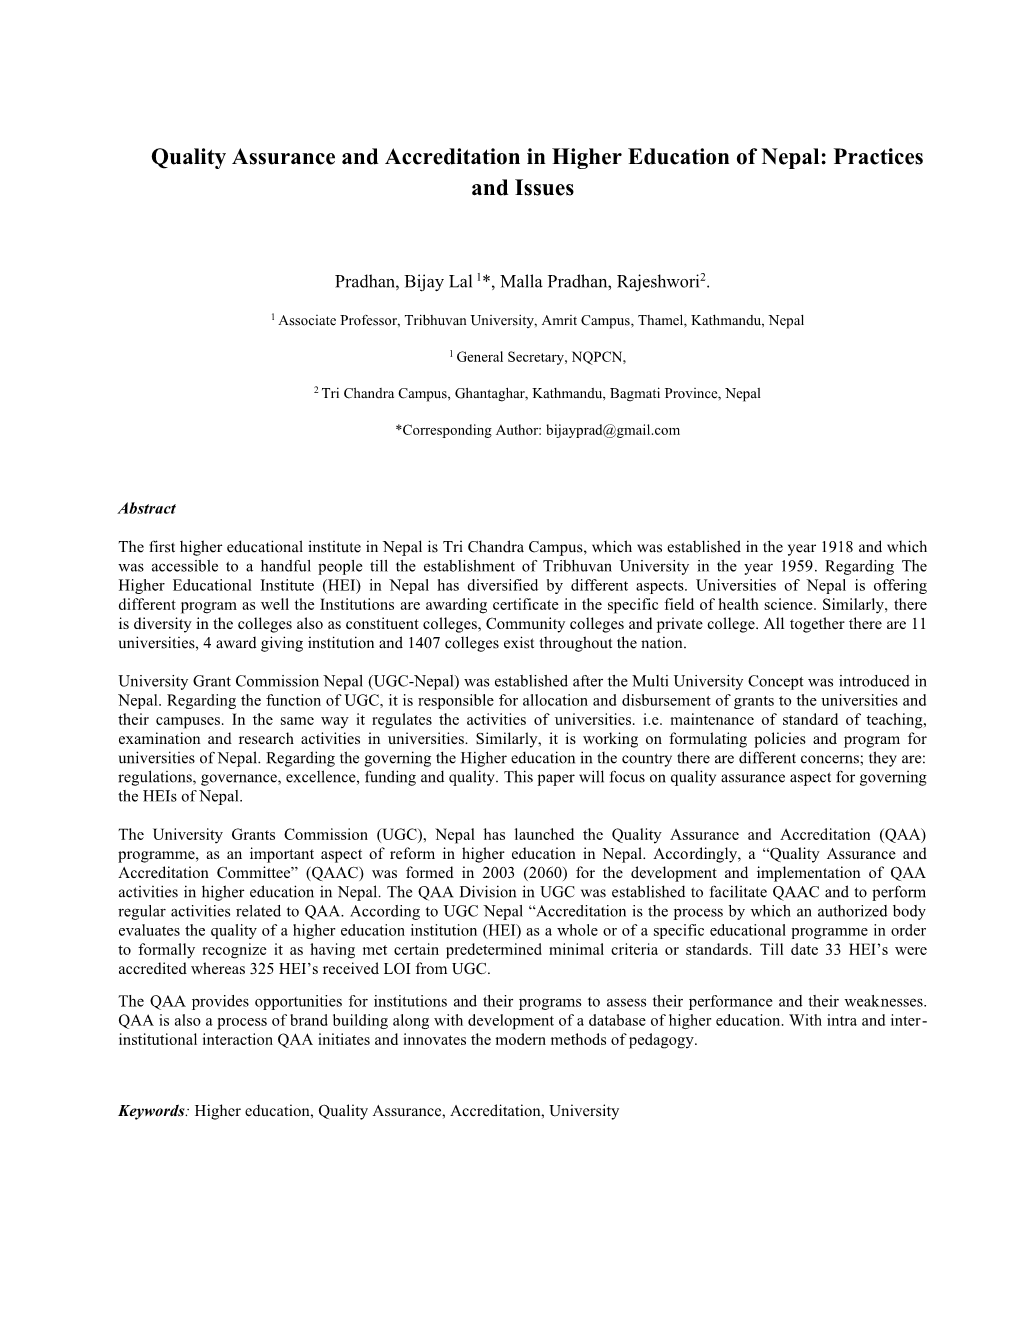 Quality Assurance and Accreditation in Higher Education of Nepal: Practices and Issues